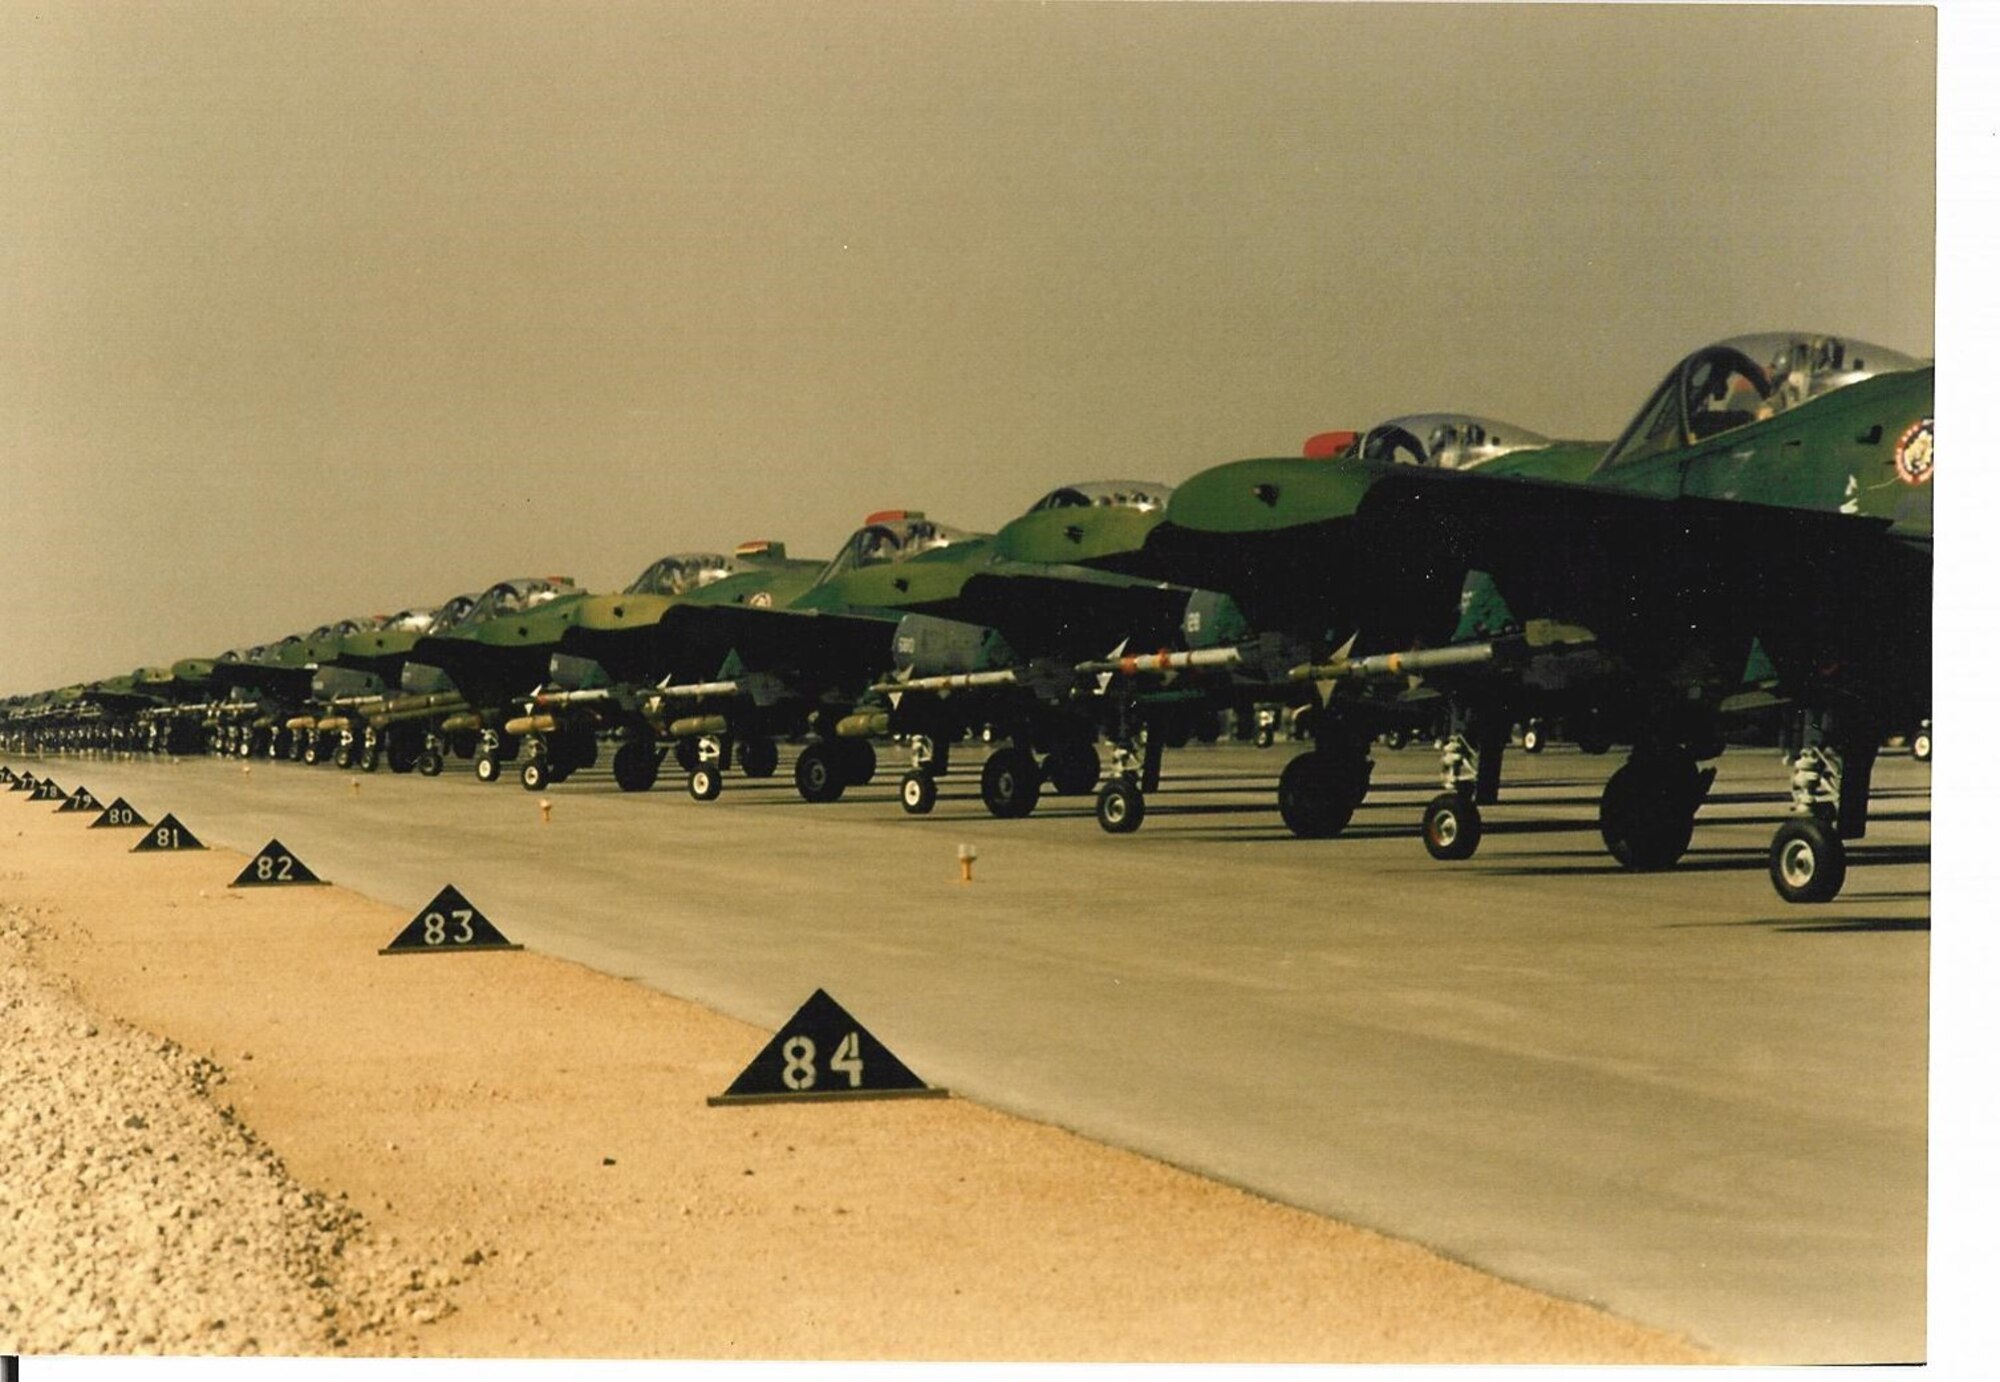 A line up of the A-10s that operated during Operation Desert Storm.